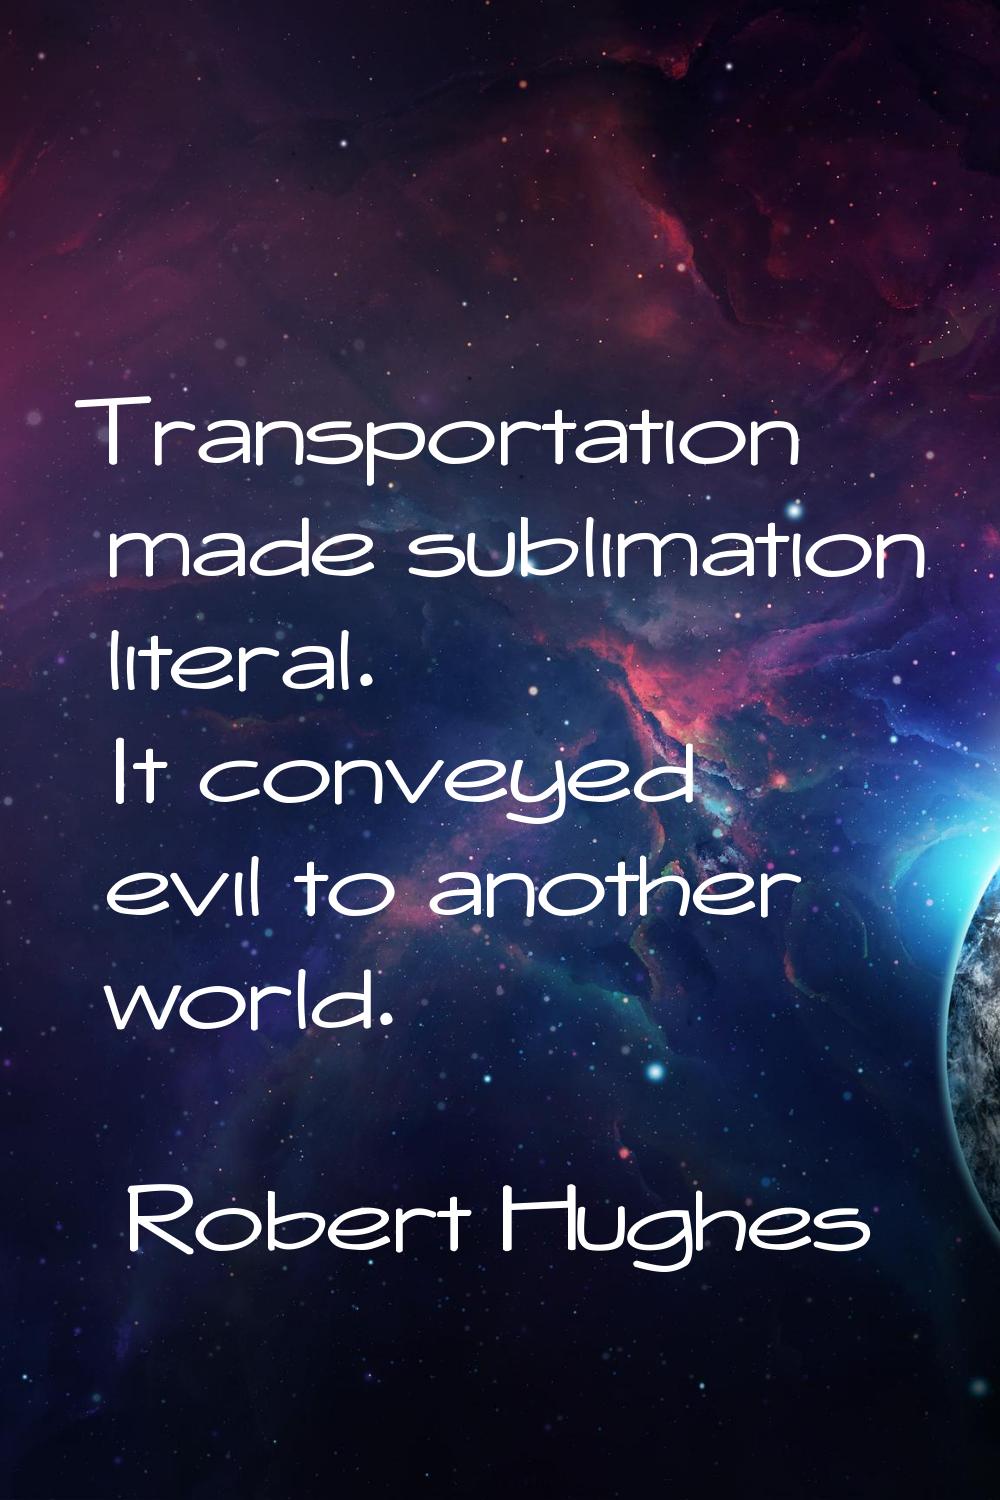 Transportation made sublimation literal. It conveyed evil to another world.